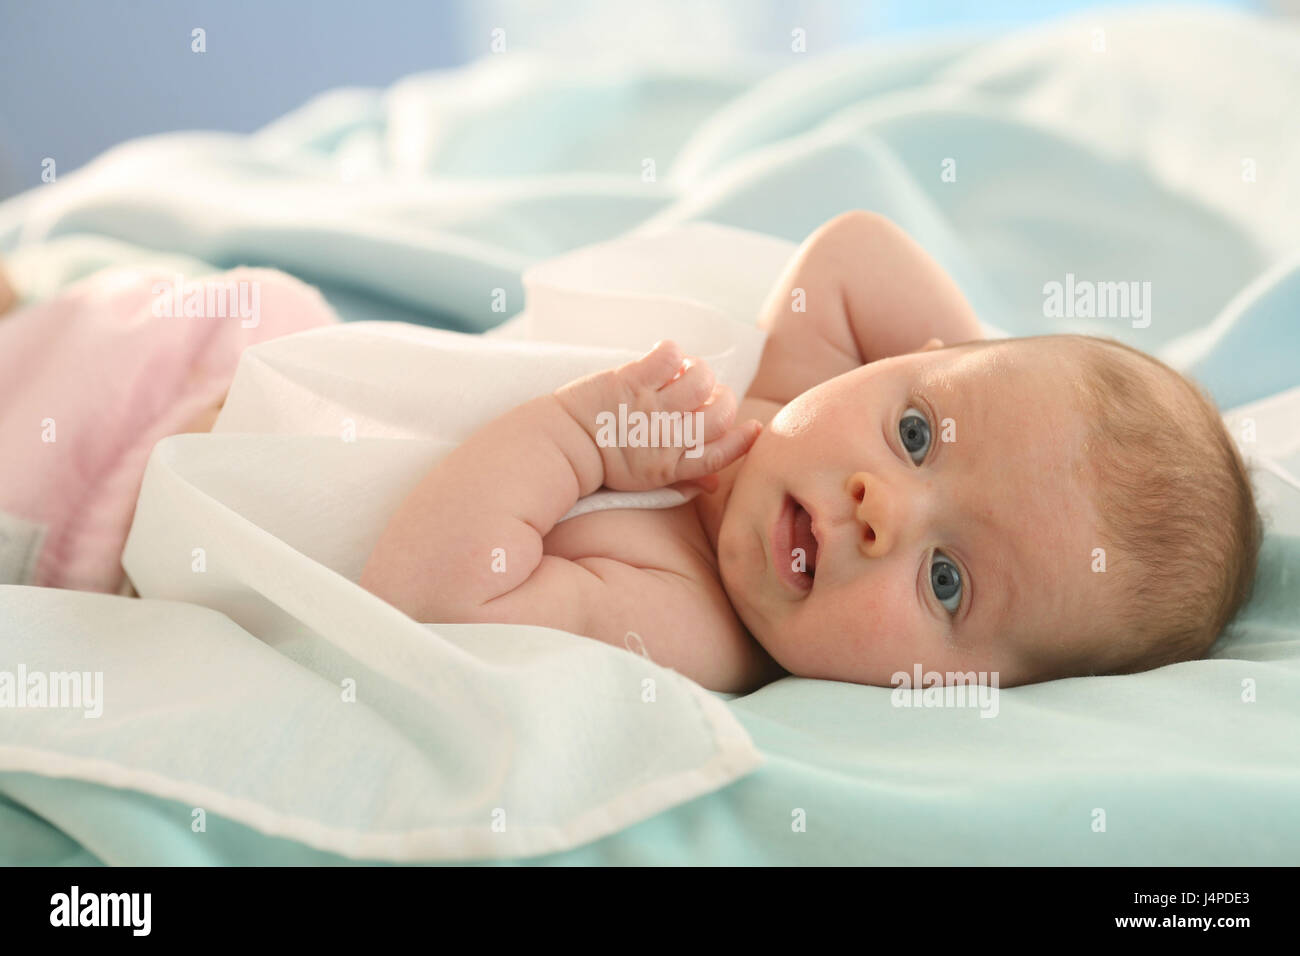 Baby, there lie girls, bed, Stock Photo